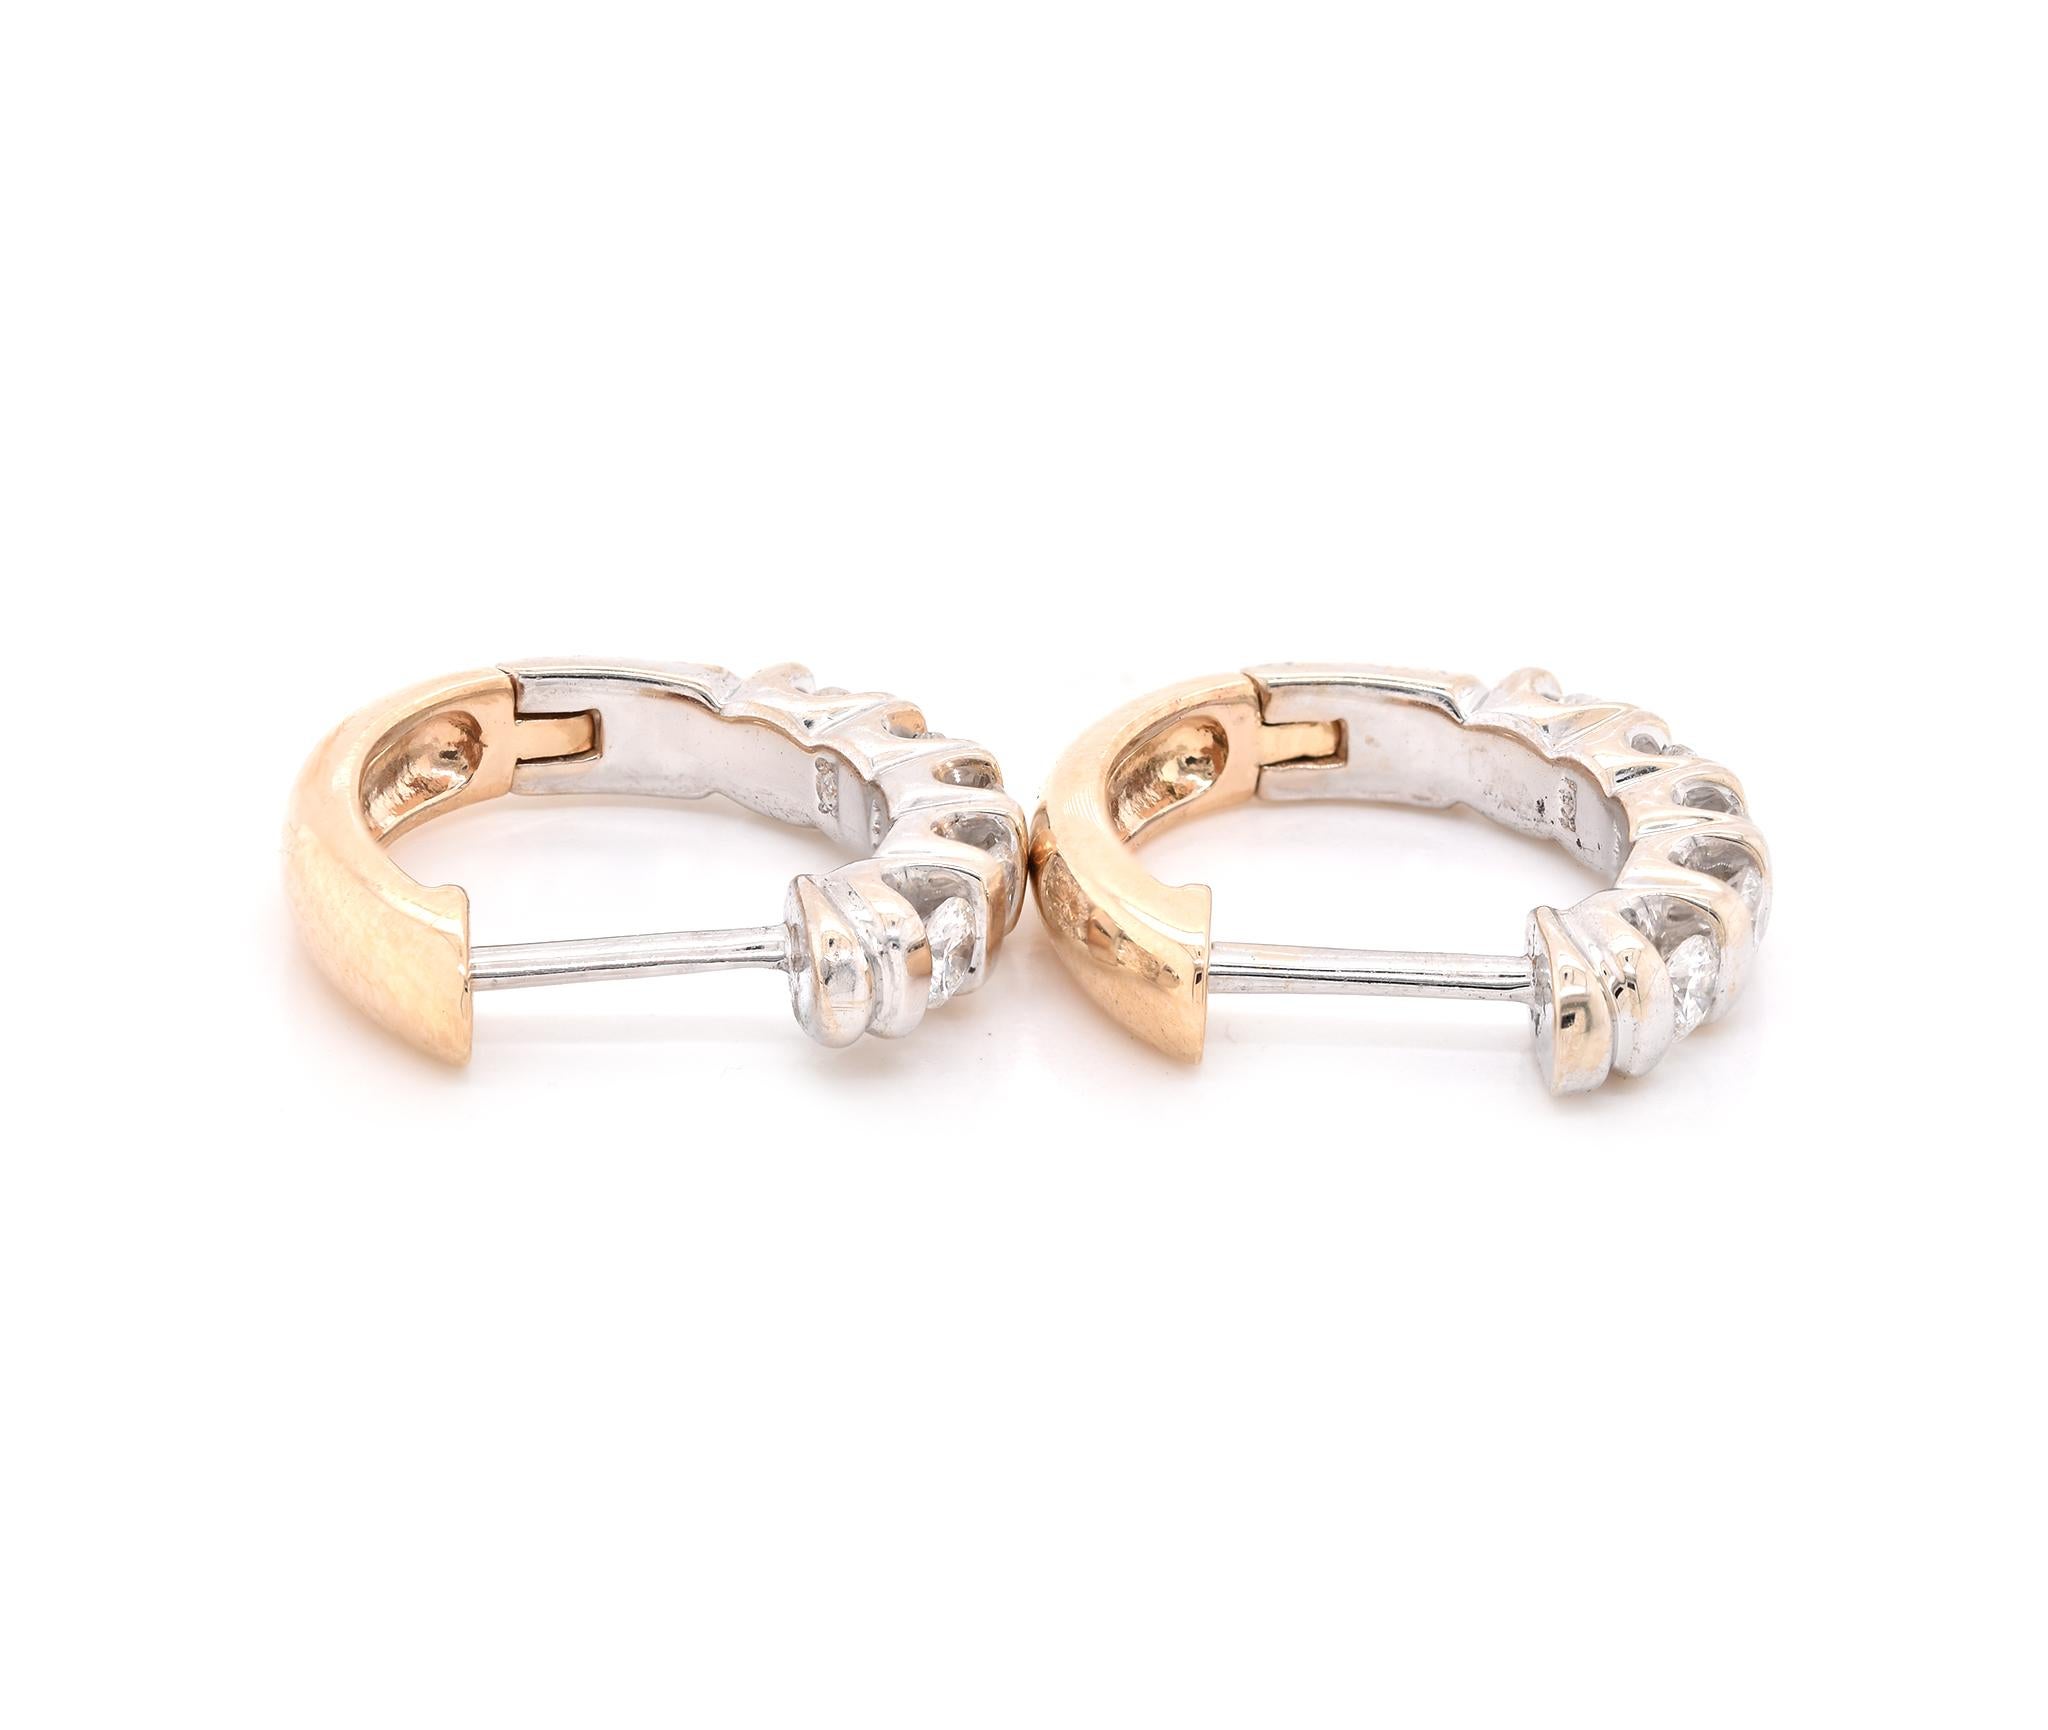 Designer: custom
Material: 14K white and yellow gold
Diamonds: 10 round cut = .45cttw
Color: G
Clarity: SI1
Dimensions: earrings measure 16.3mm long 
Weight: 4.98 grams
